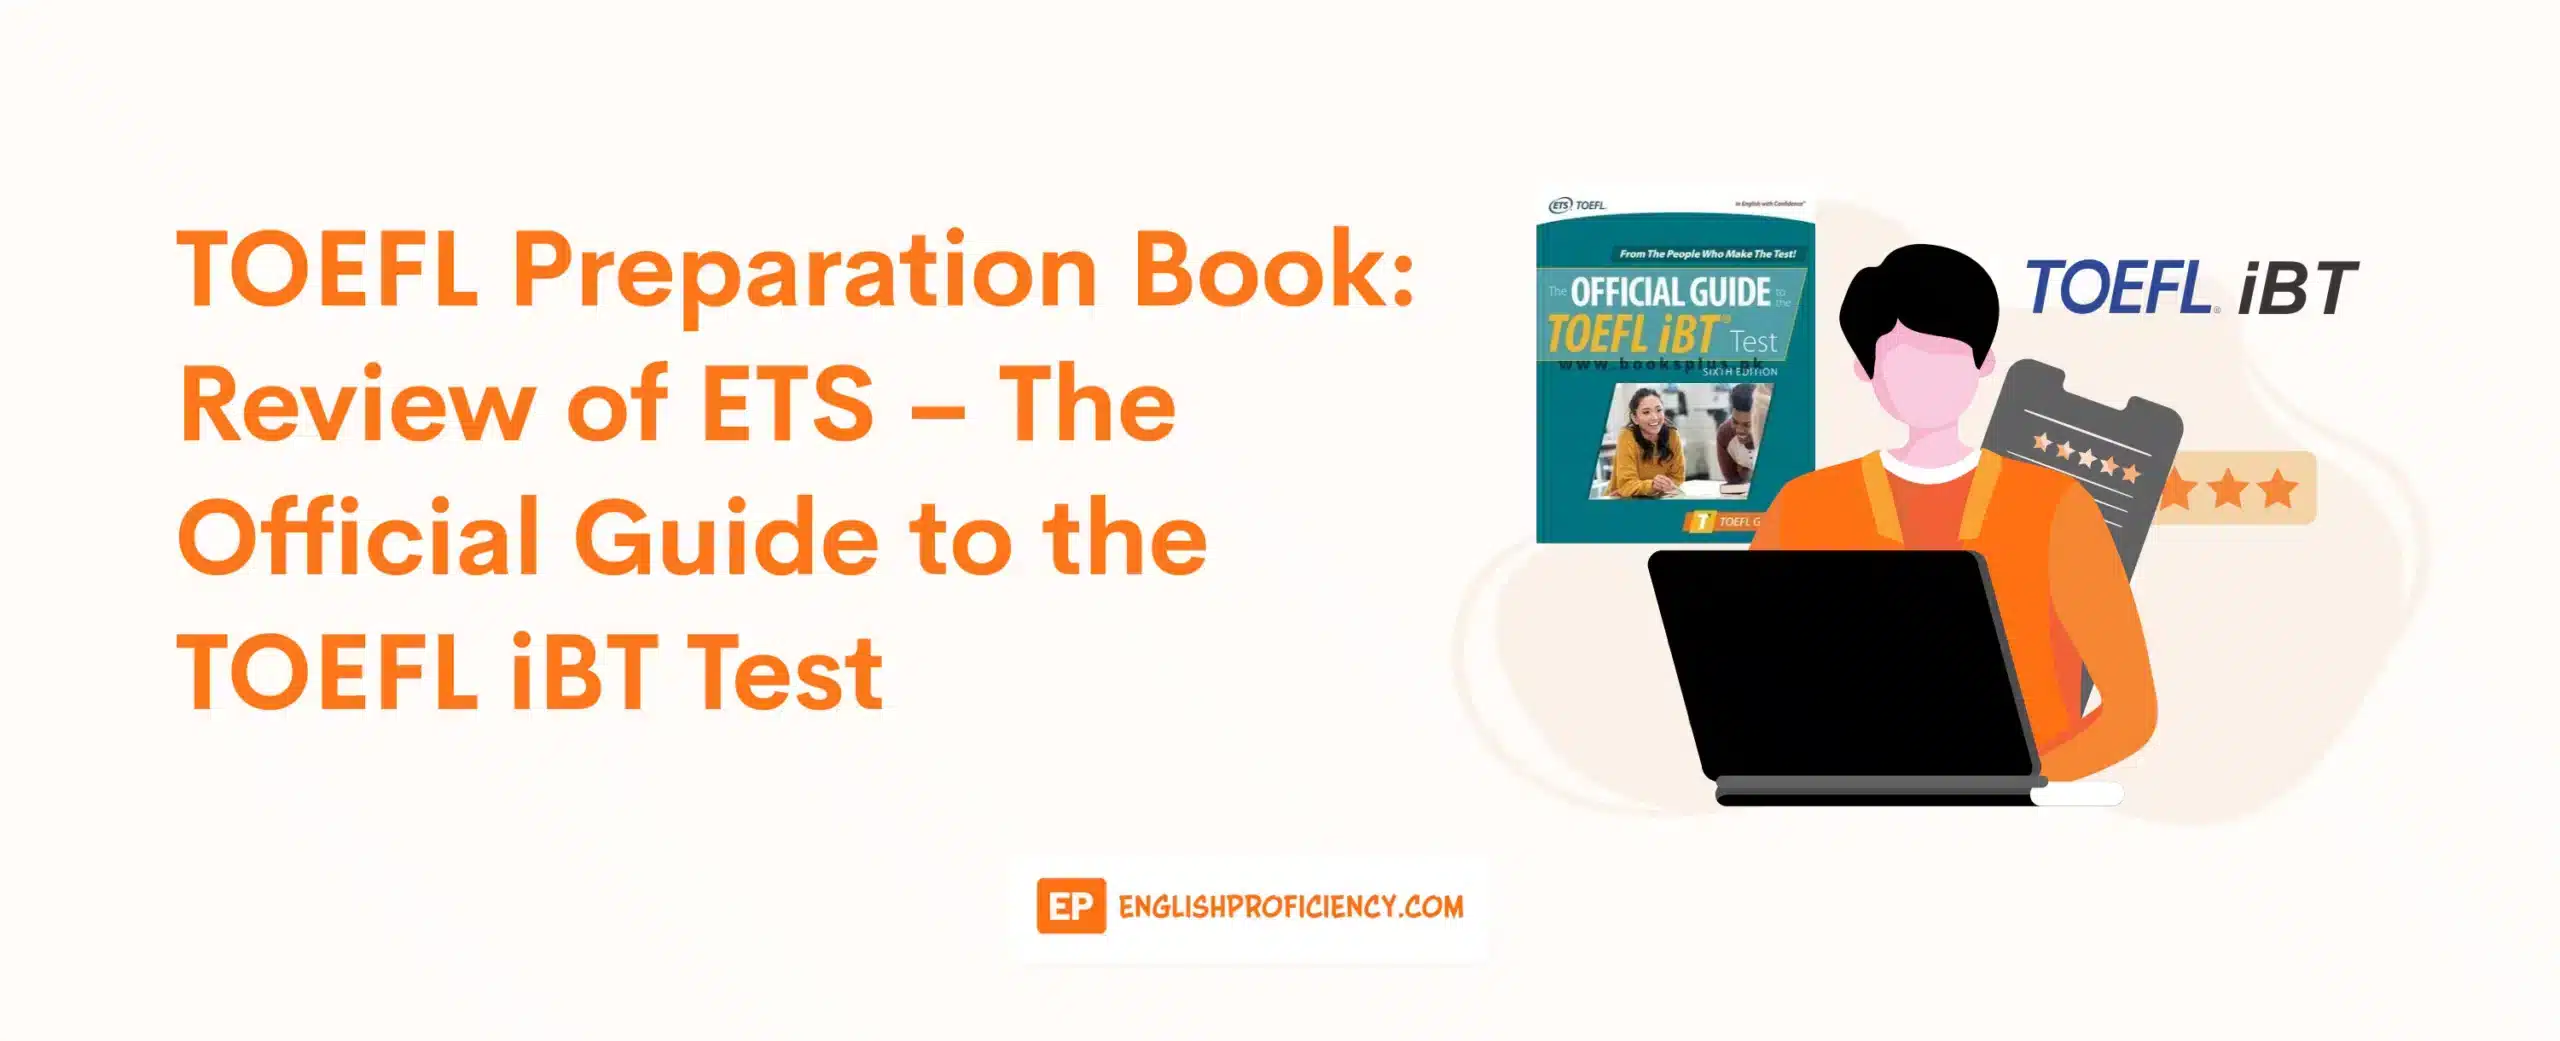 TOEFL Preparation Book Review of ETS – The Official Guide to the TOEFL iBT Test